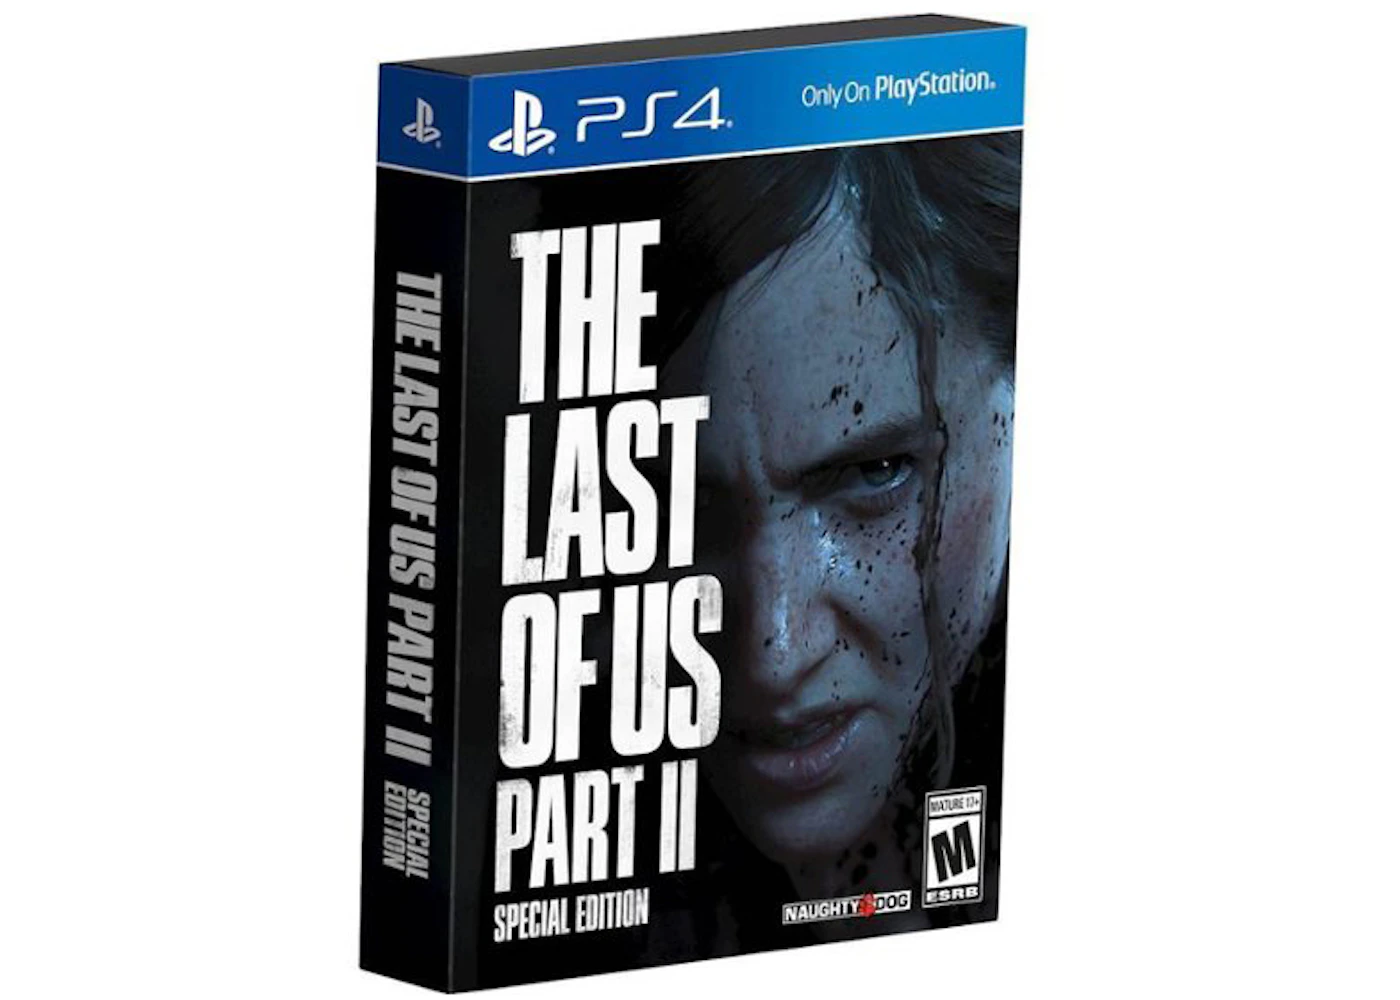 PS4 The Last of Us Part II Edition Video Game 3004826 - US